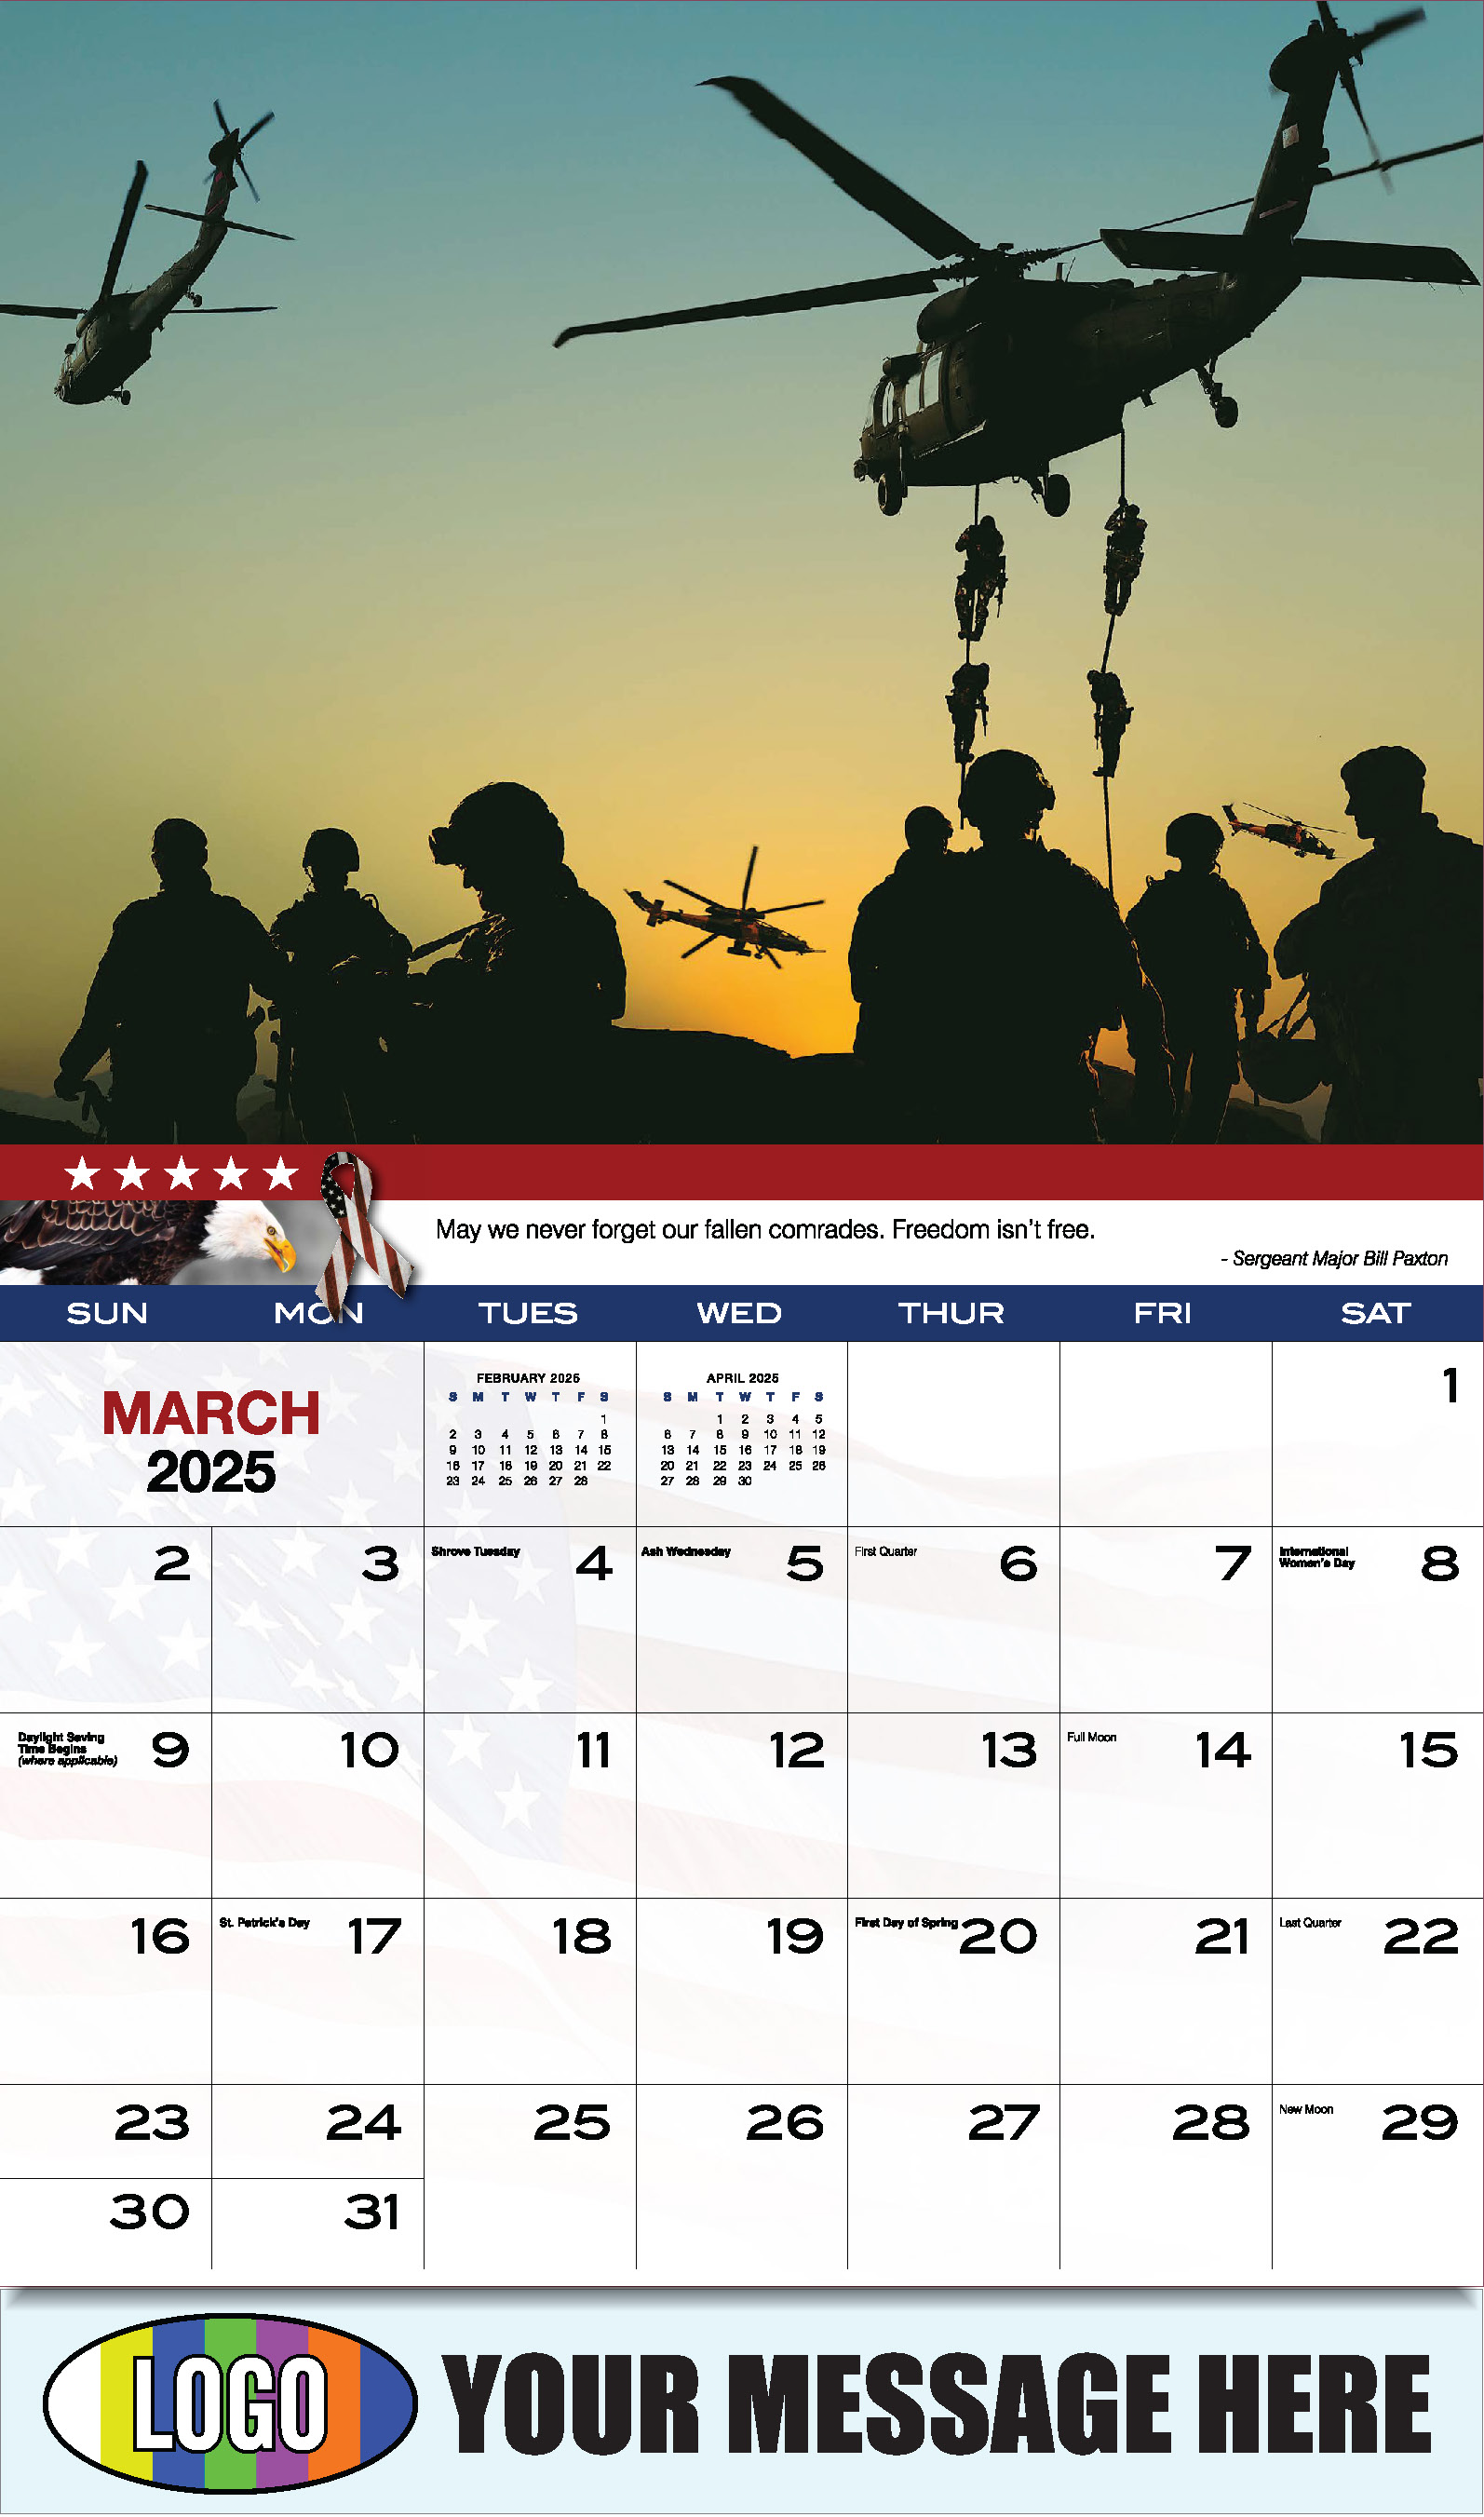 Home of the Brave 2025 USA Armed Forces Business Promo Calendar - March